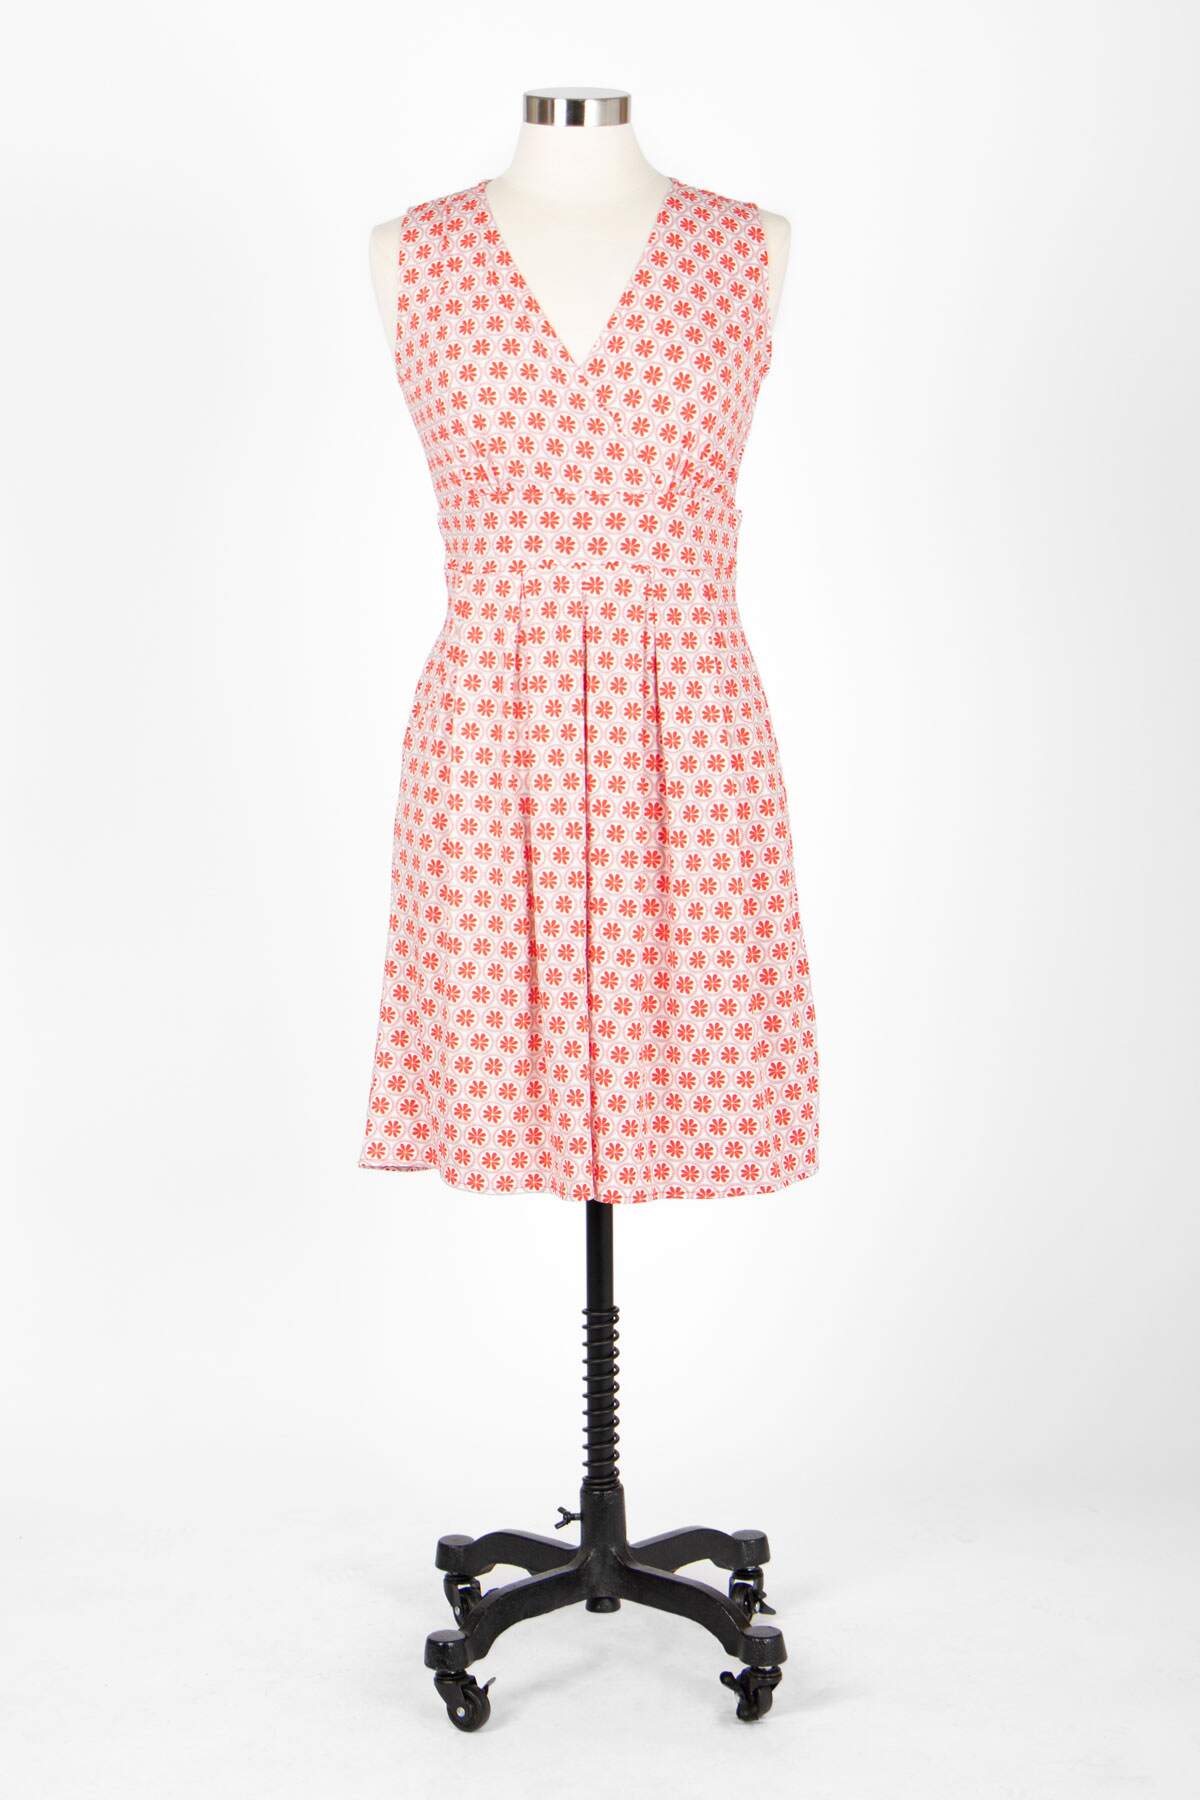 Load image into Gallery viewer, Penelope Dress in Rosy Posey by Karina Dresses
